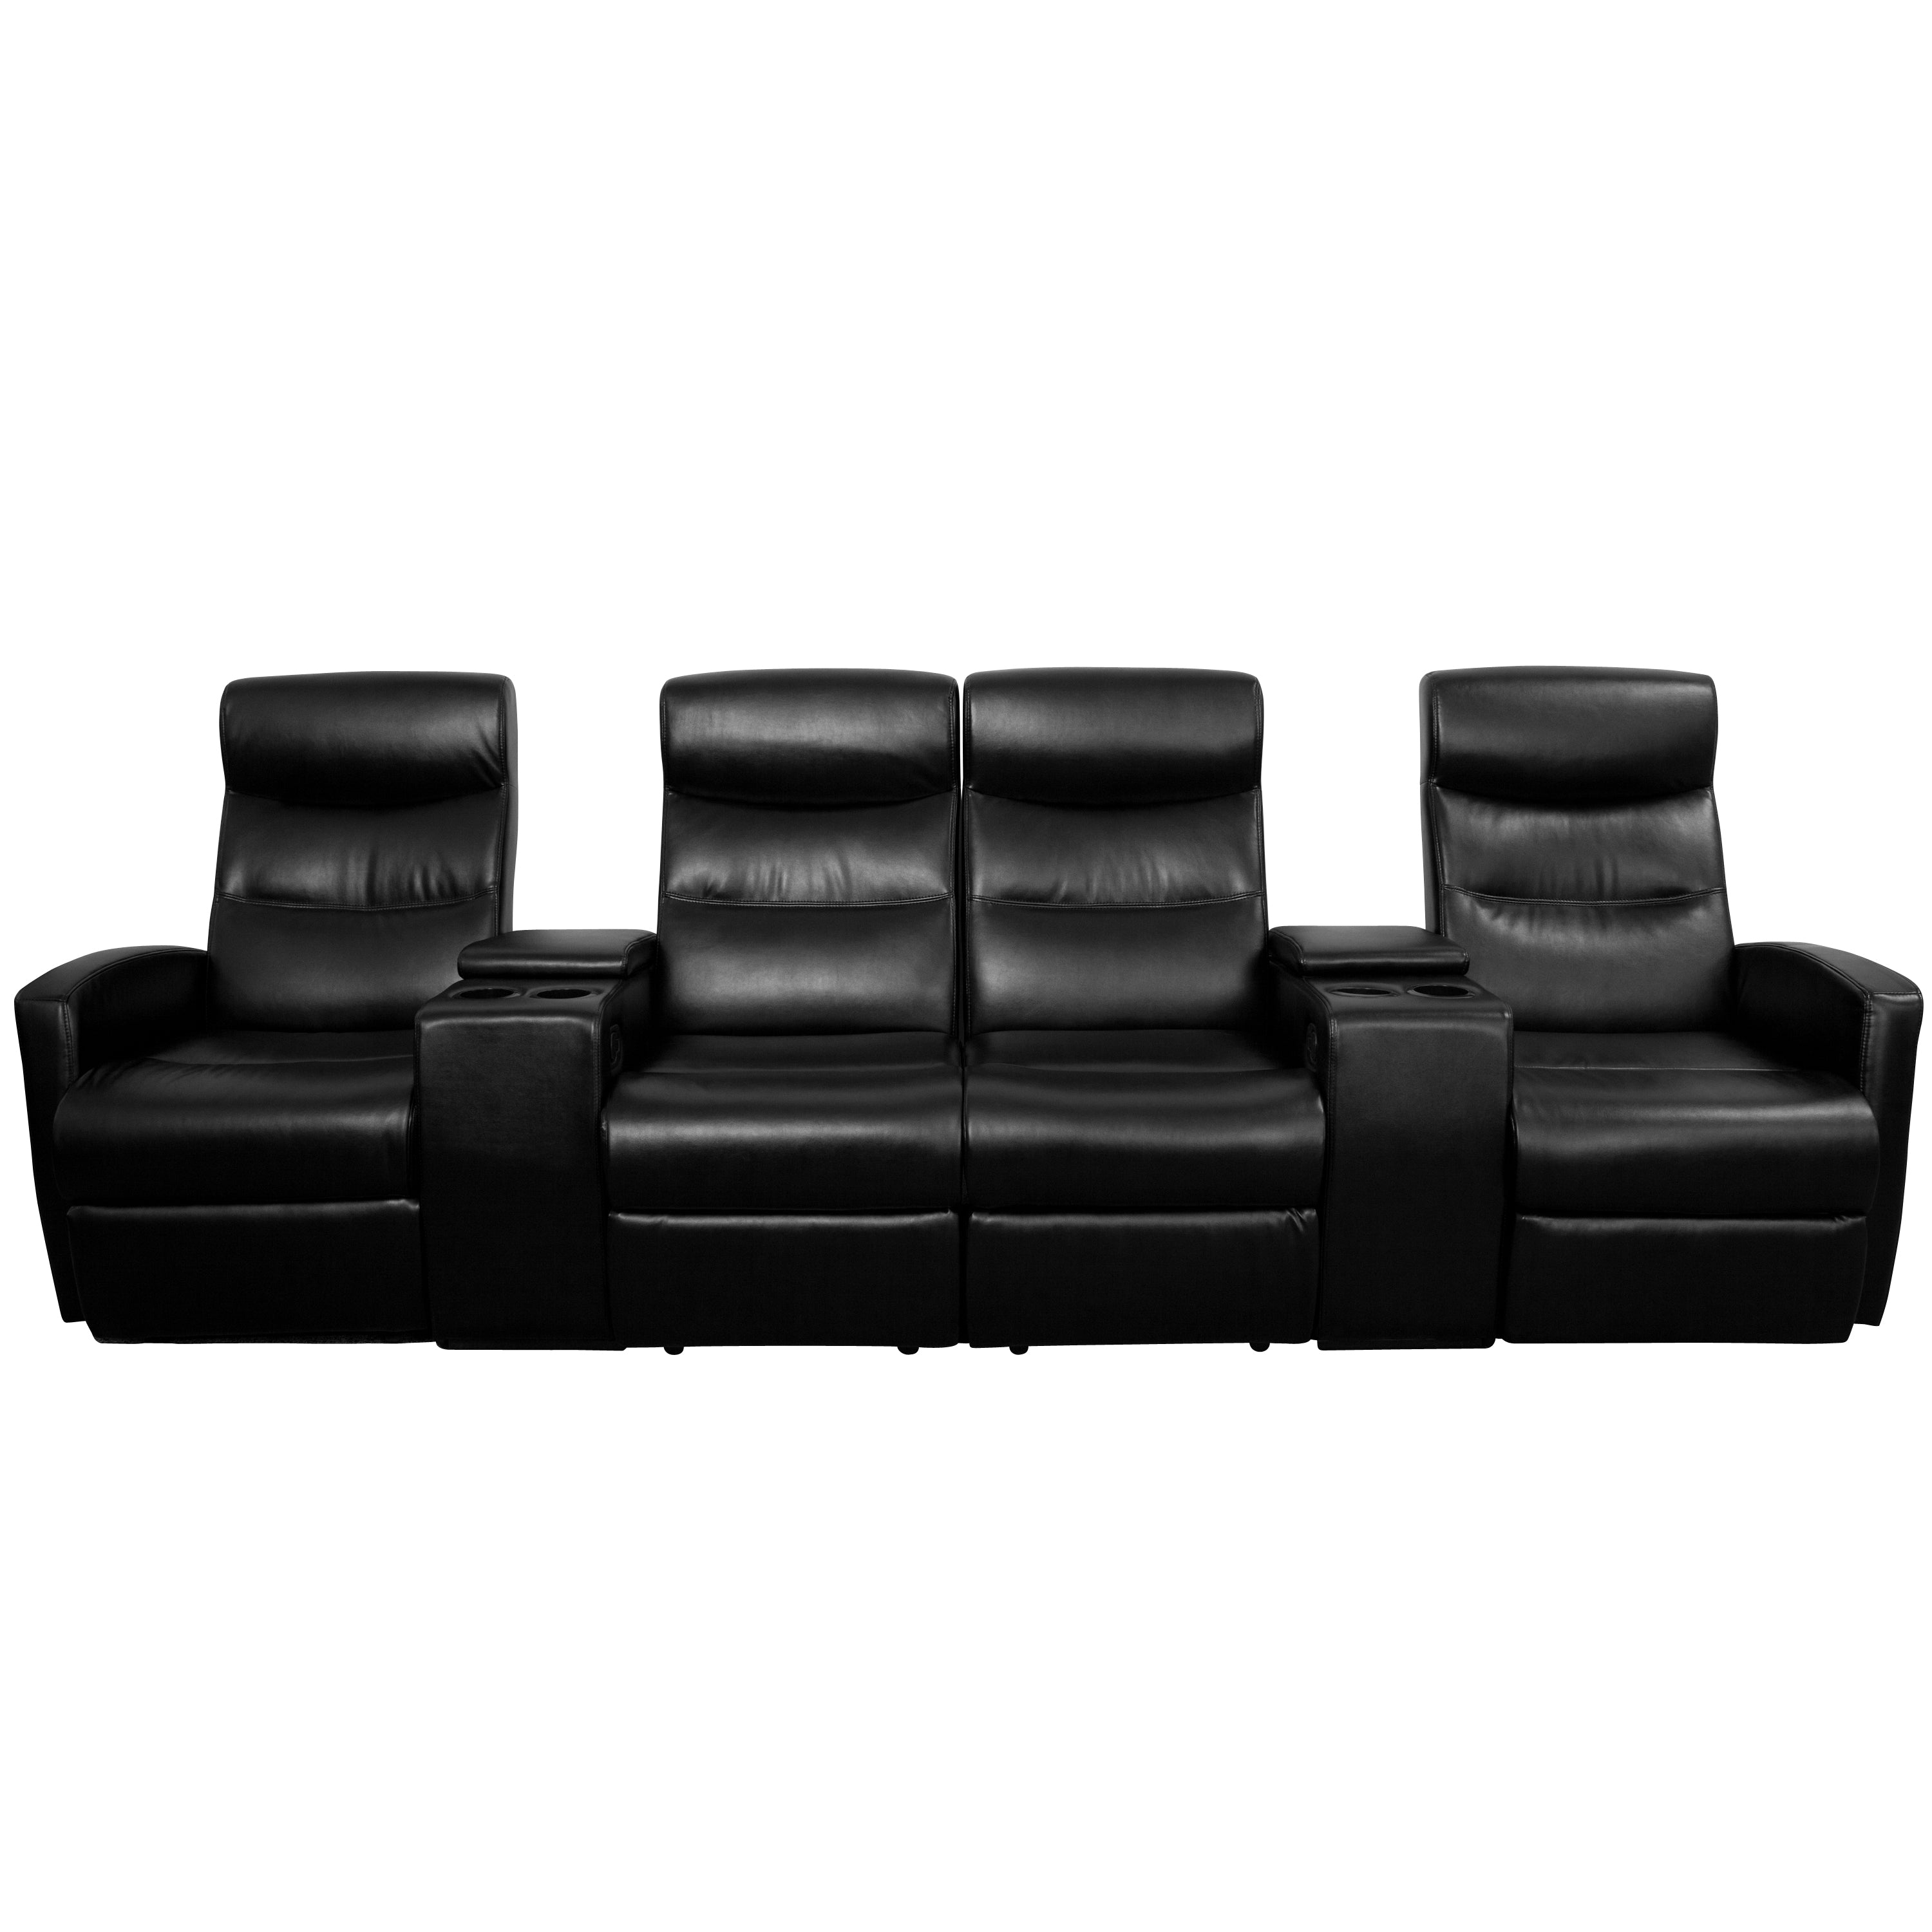 Anetos Series 4-Seat Reclining LeatherSoft Theater Seating Unit with Cup Holders-Theater Seating-Flash Furniture-Wall2Wall Furnishings